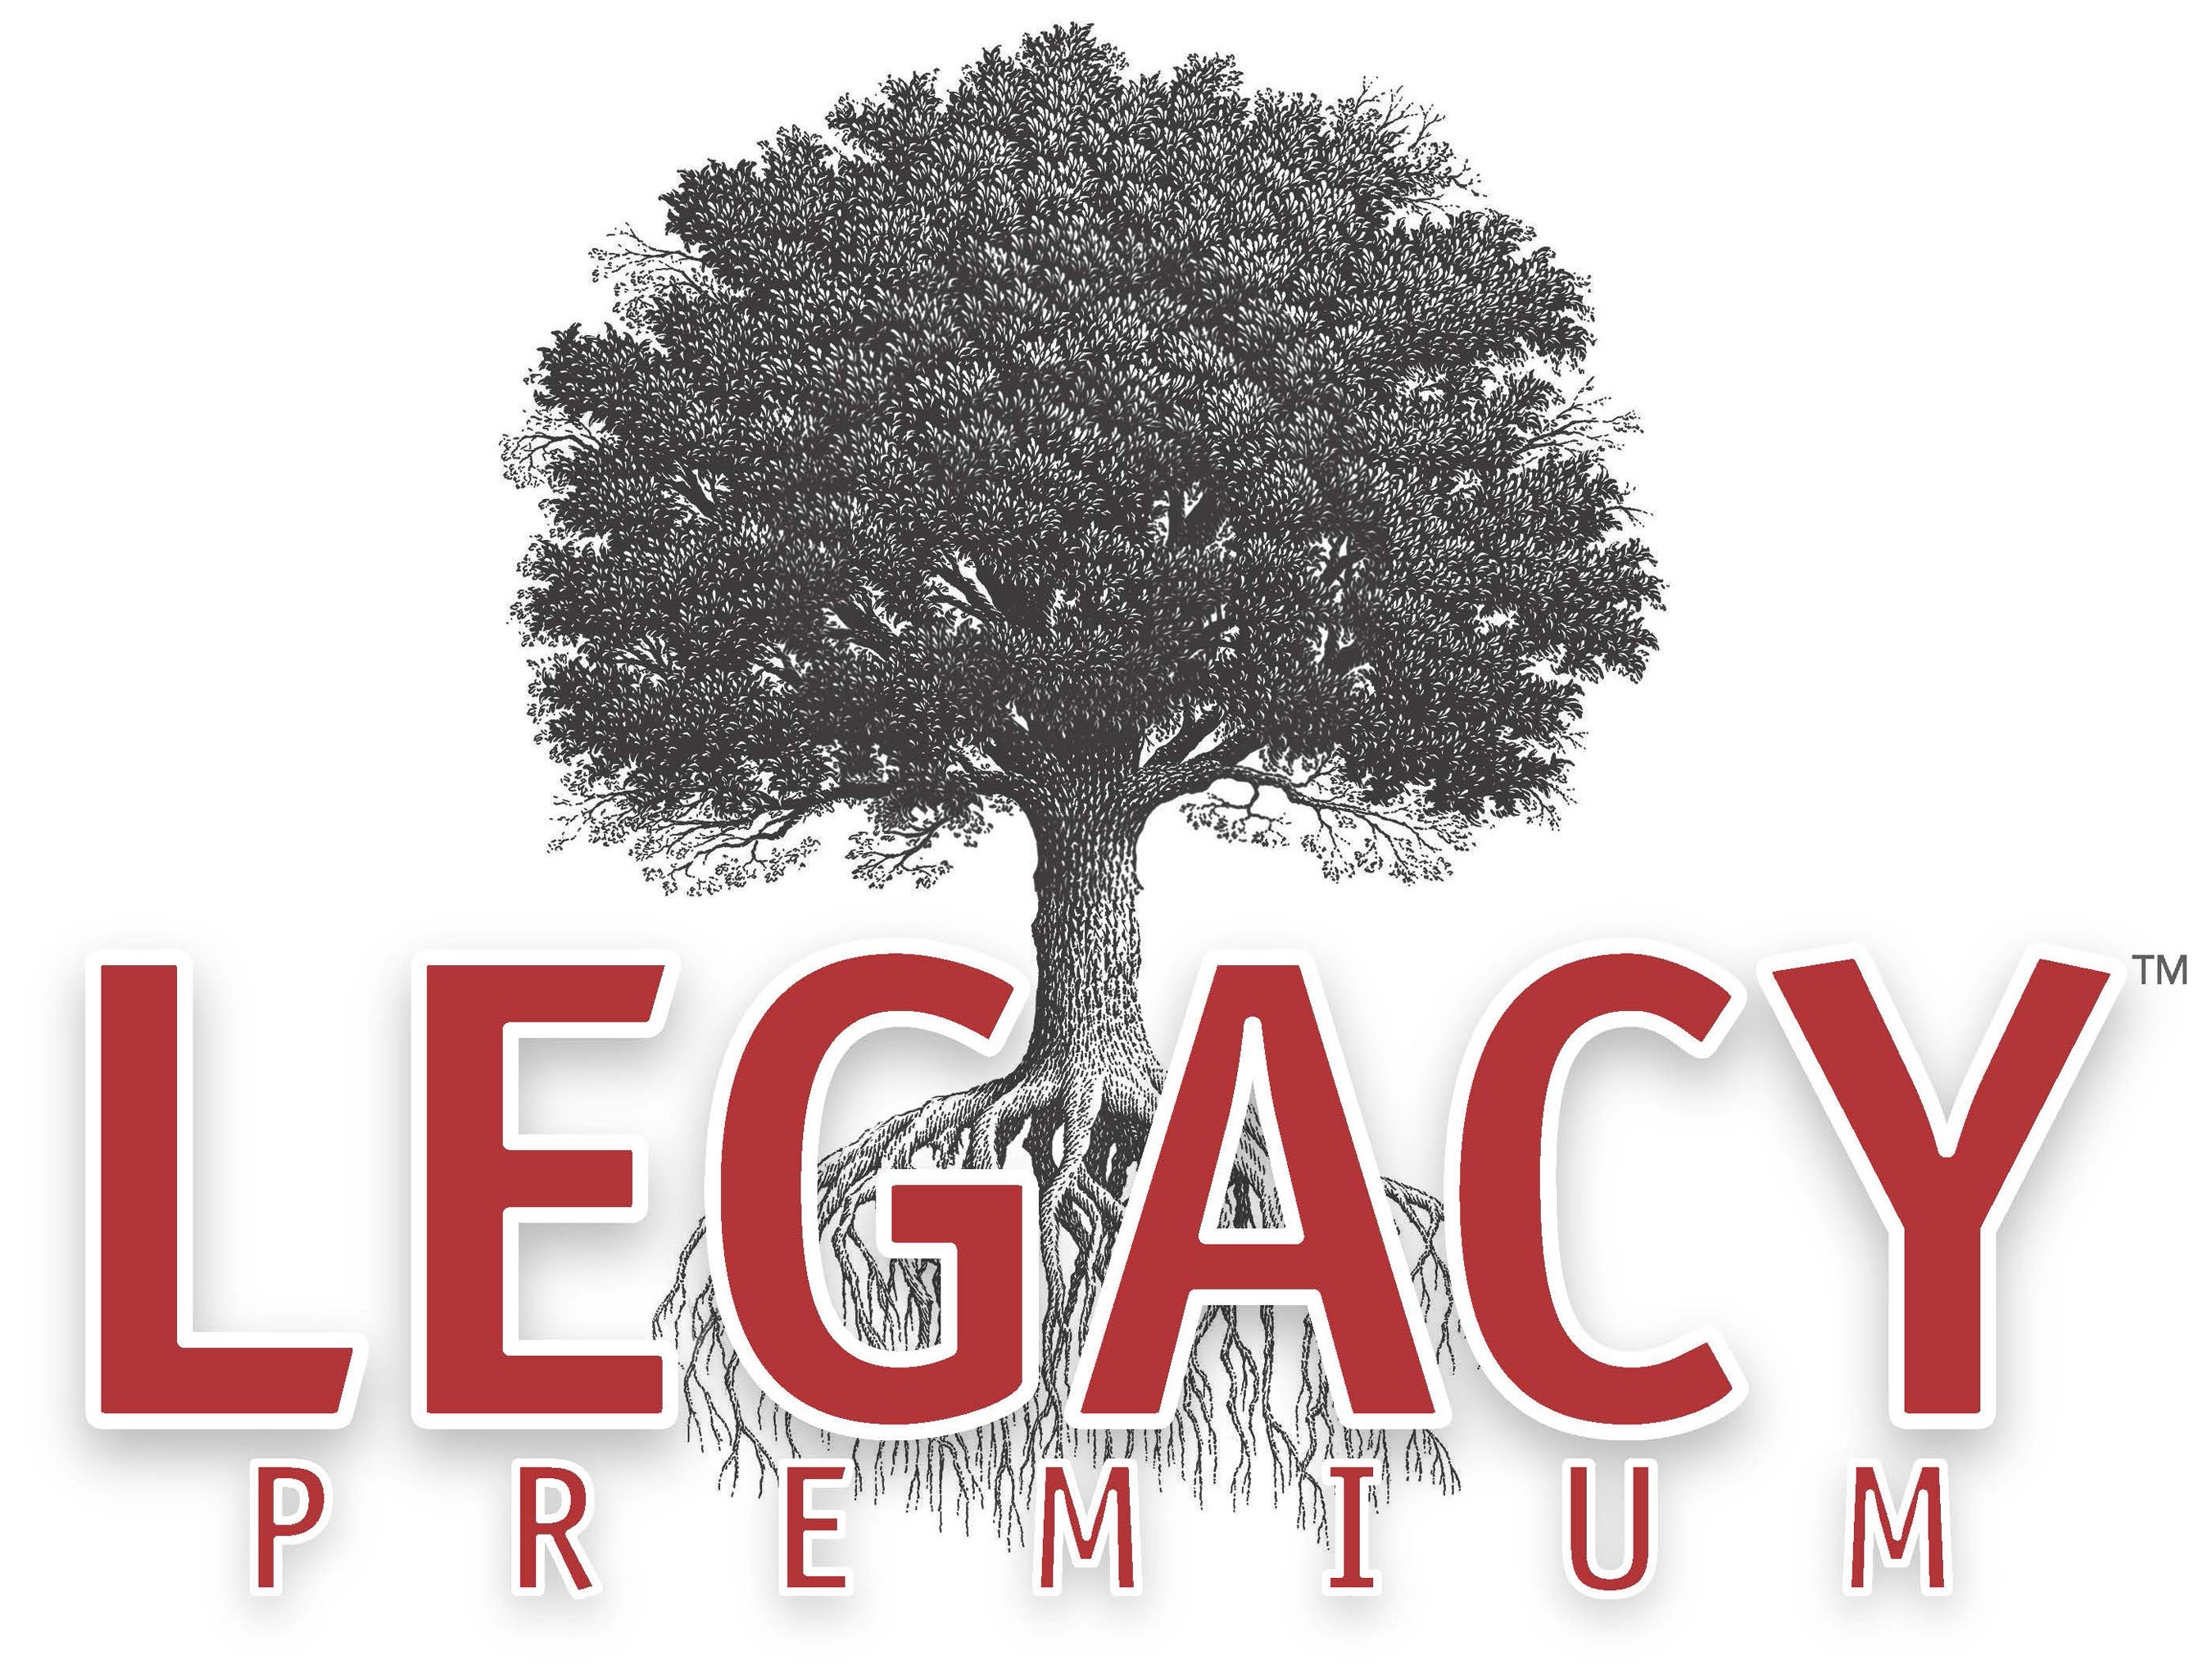 Legacy Food Storage manufacturers Legacy Premium, good tasting, high-quality gourmet meals for food storage and emergency use, and distributes other items to prepare for natural disasters and other emergencies.